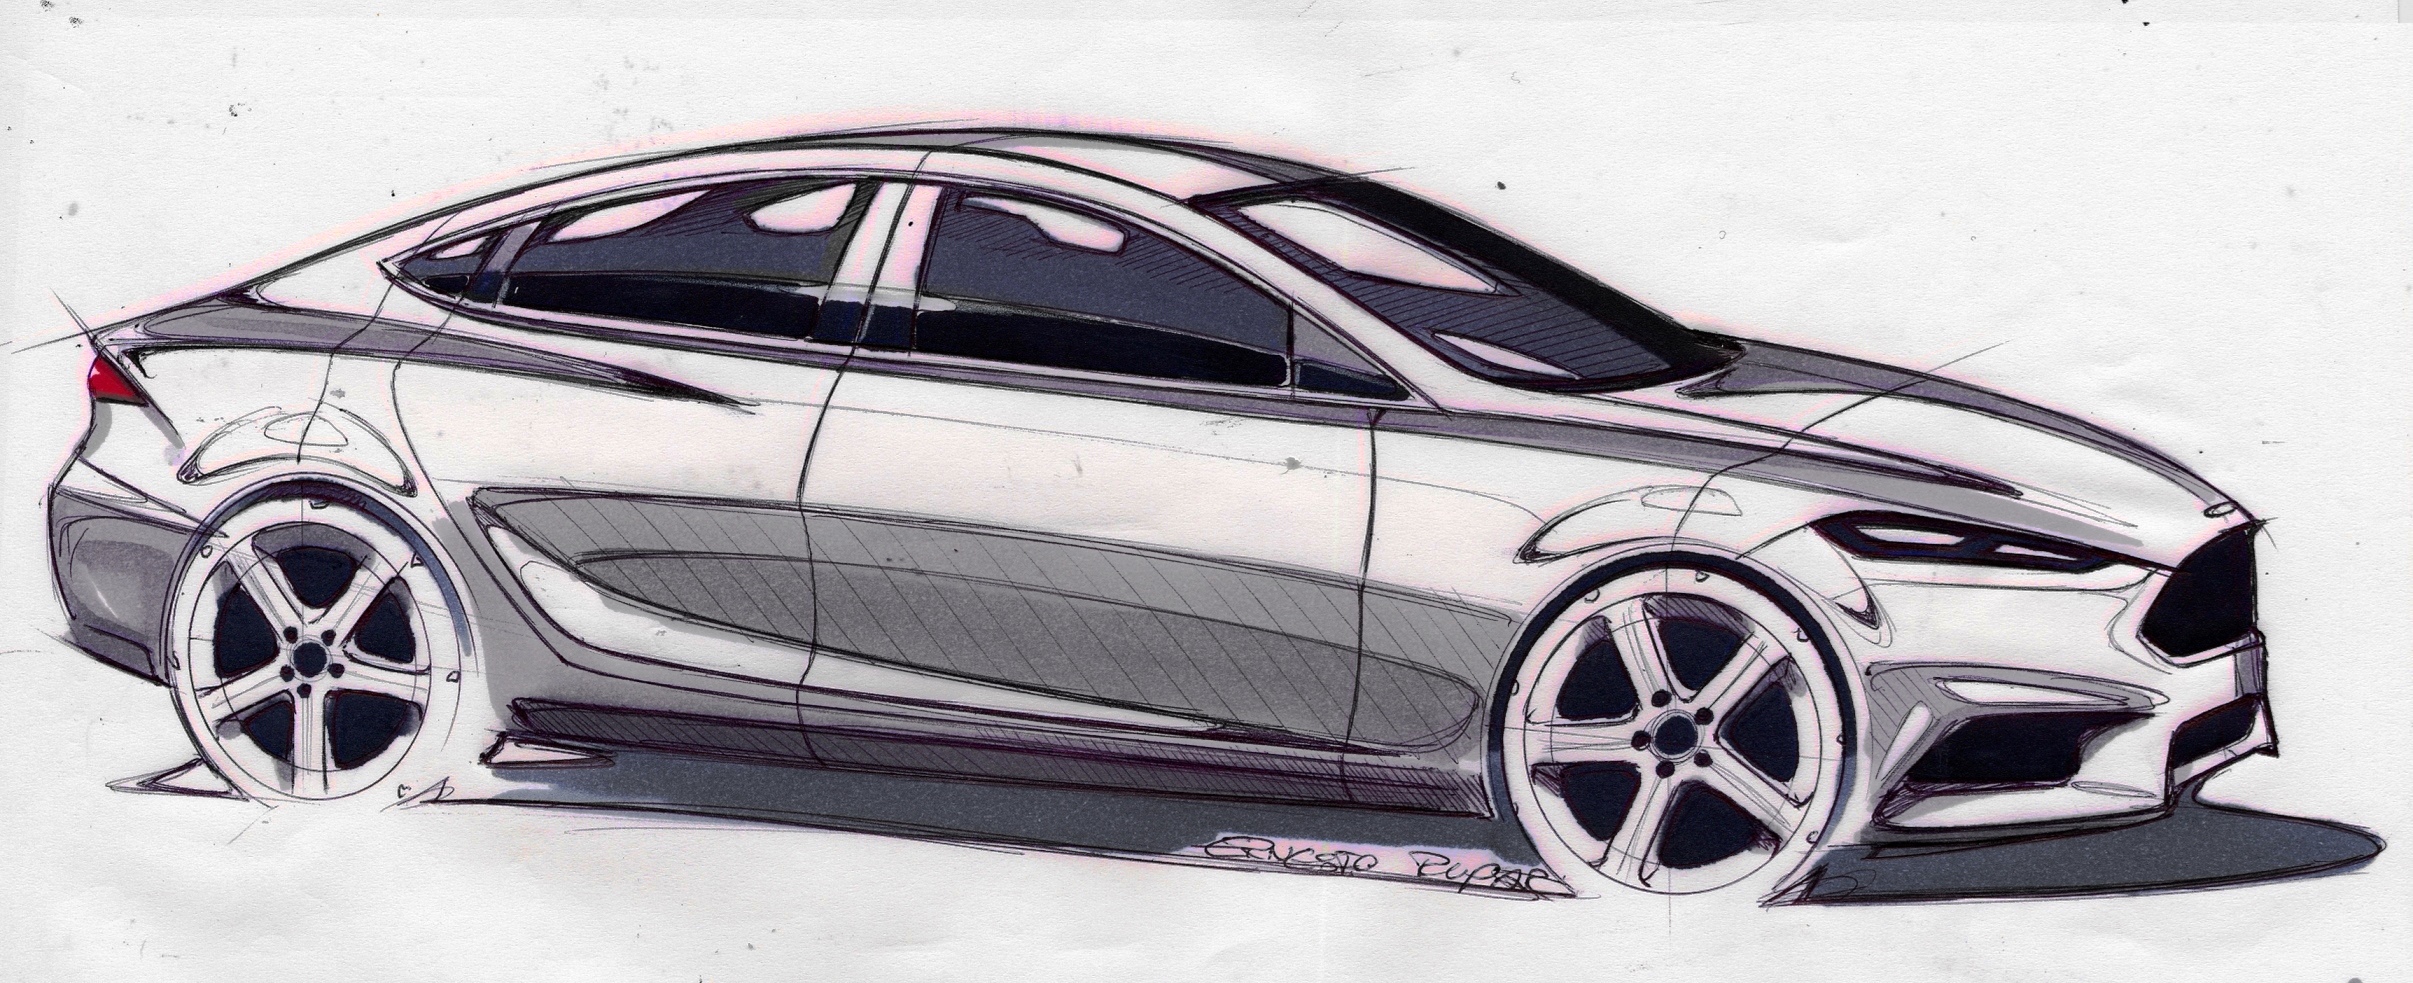 Ford Advanced Design Sketches May Show Direction of 2016 Taurus Redesign